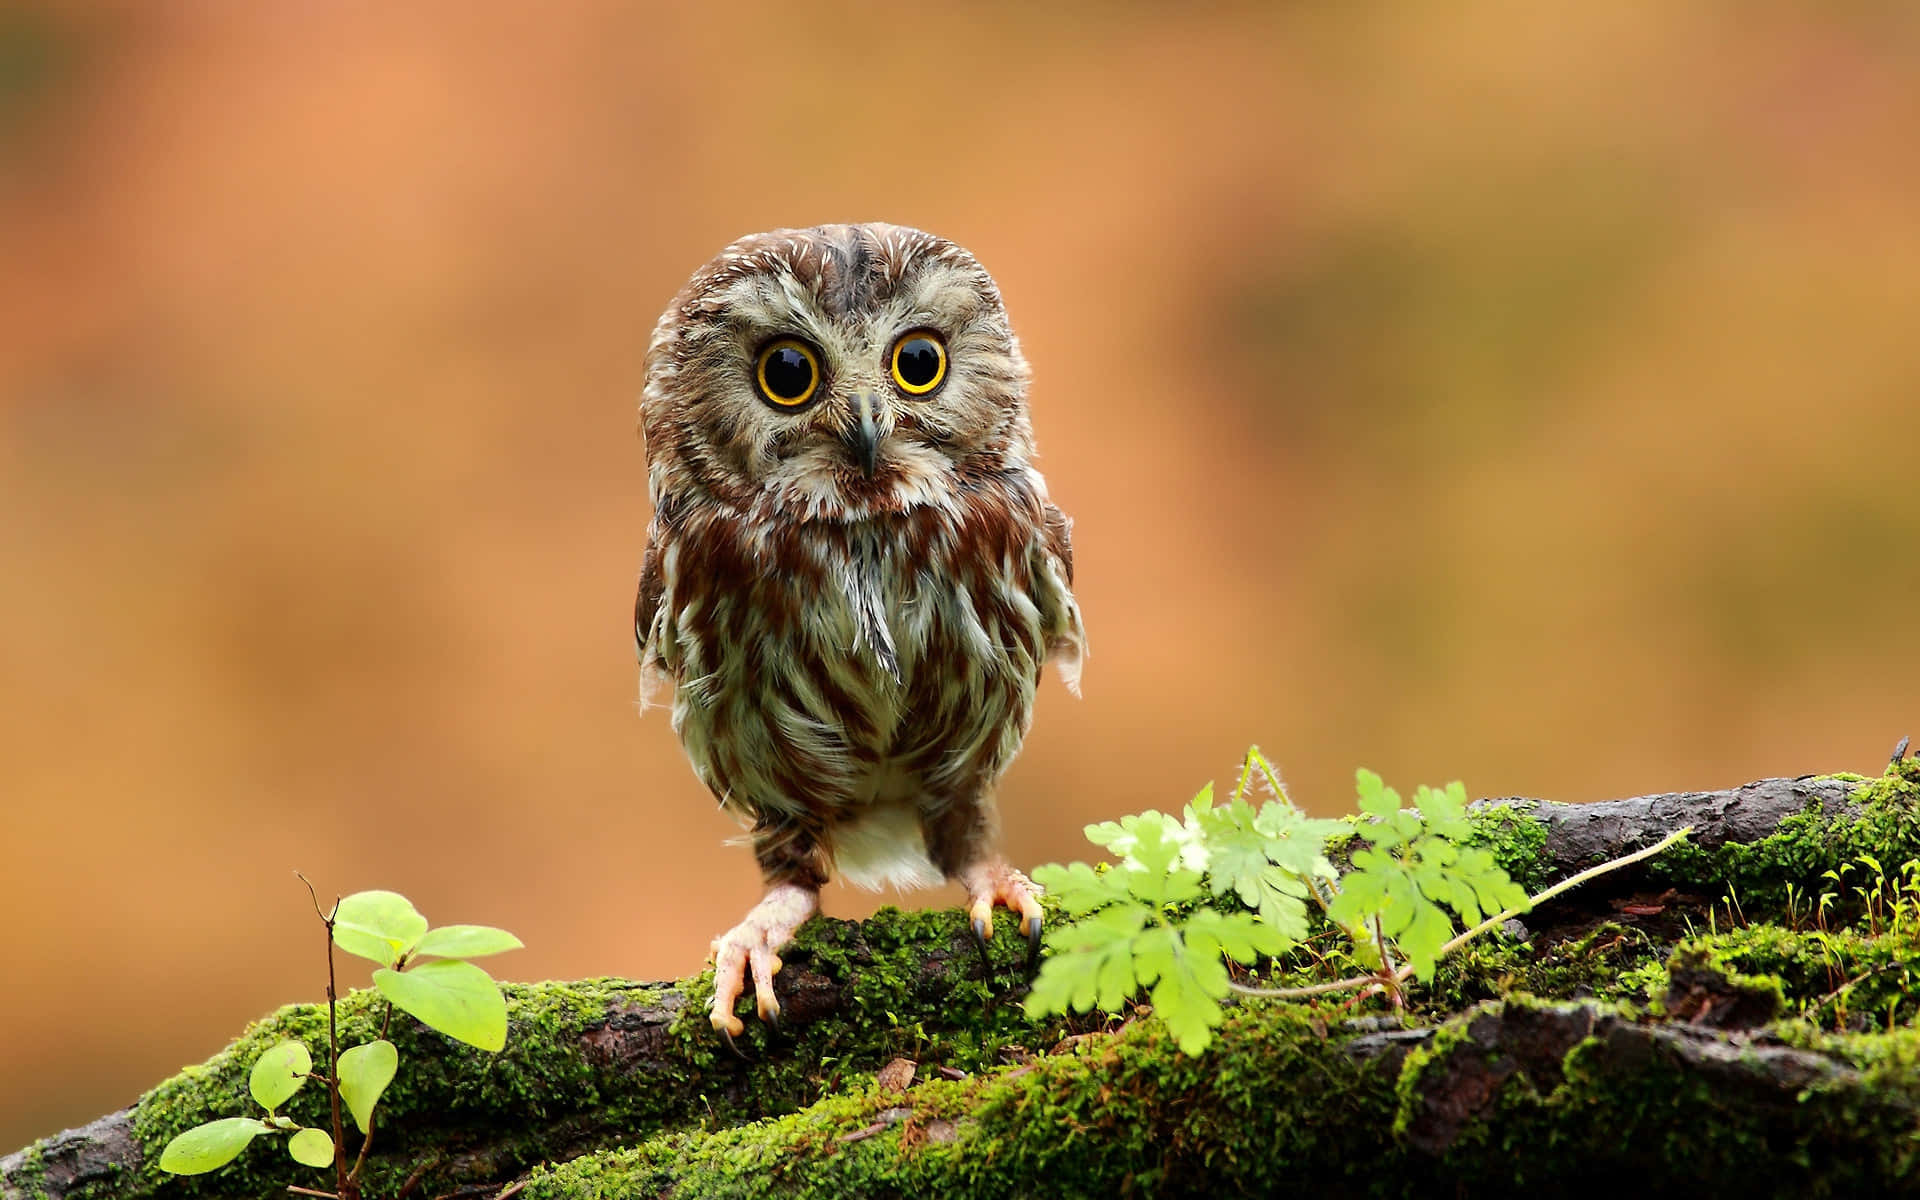 A Small Owl Is Standing On A Branch With Moss